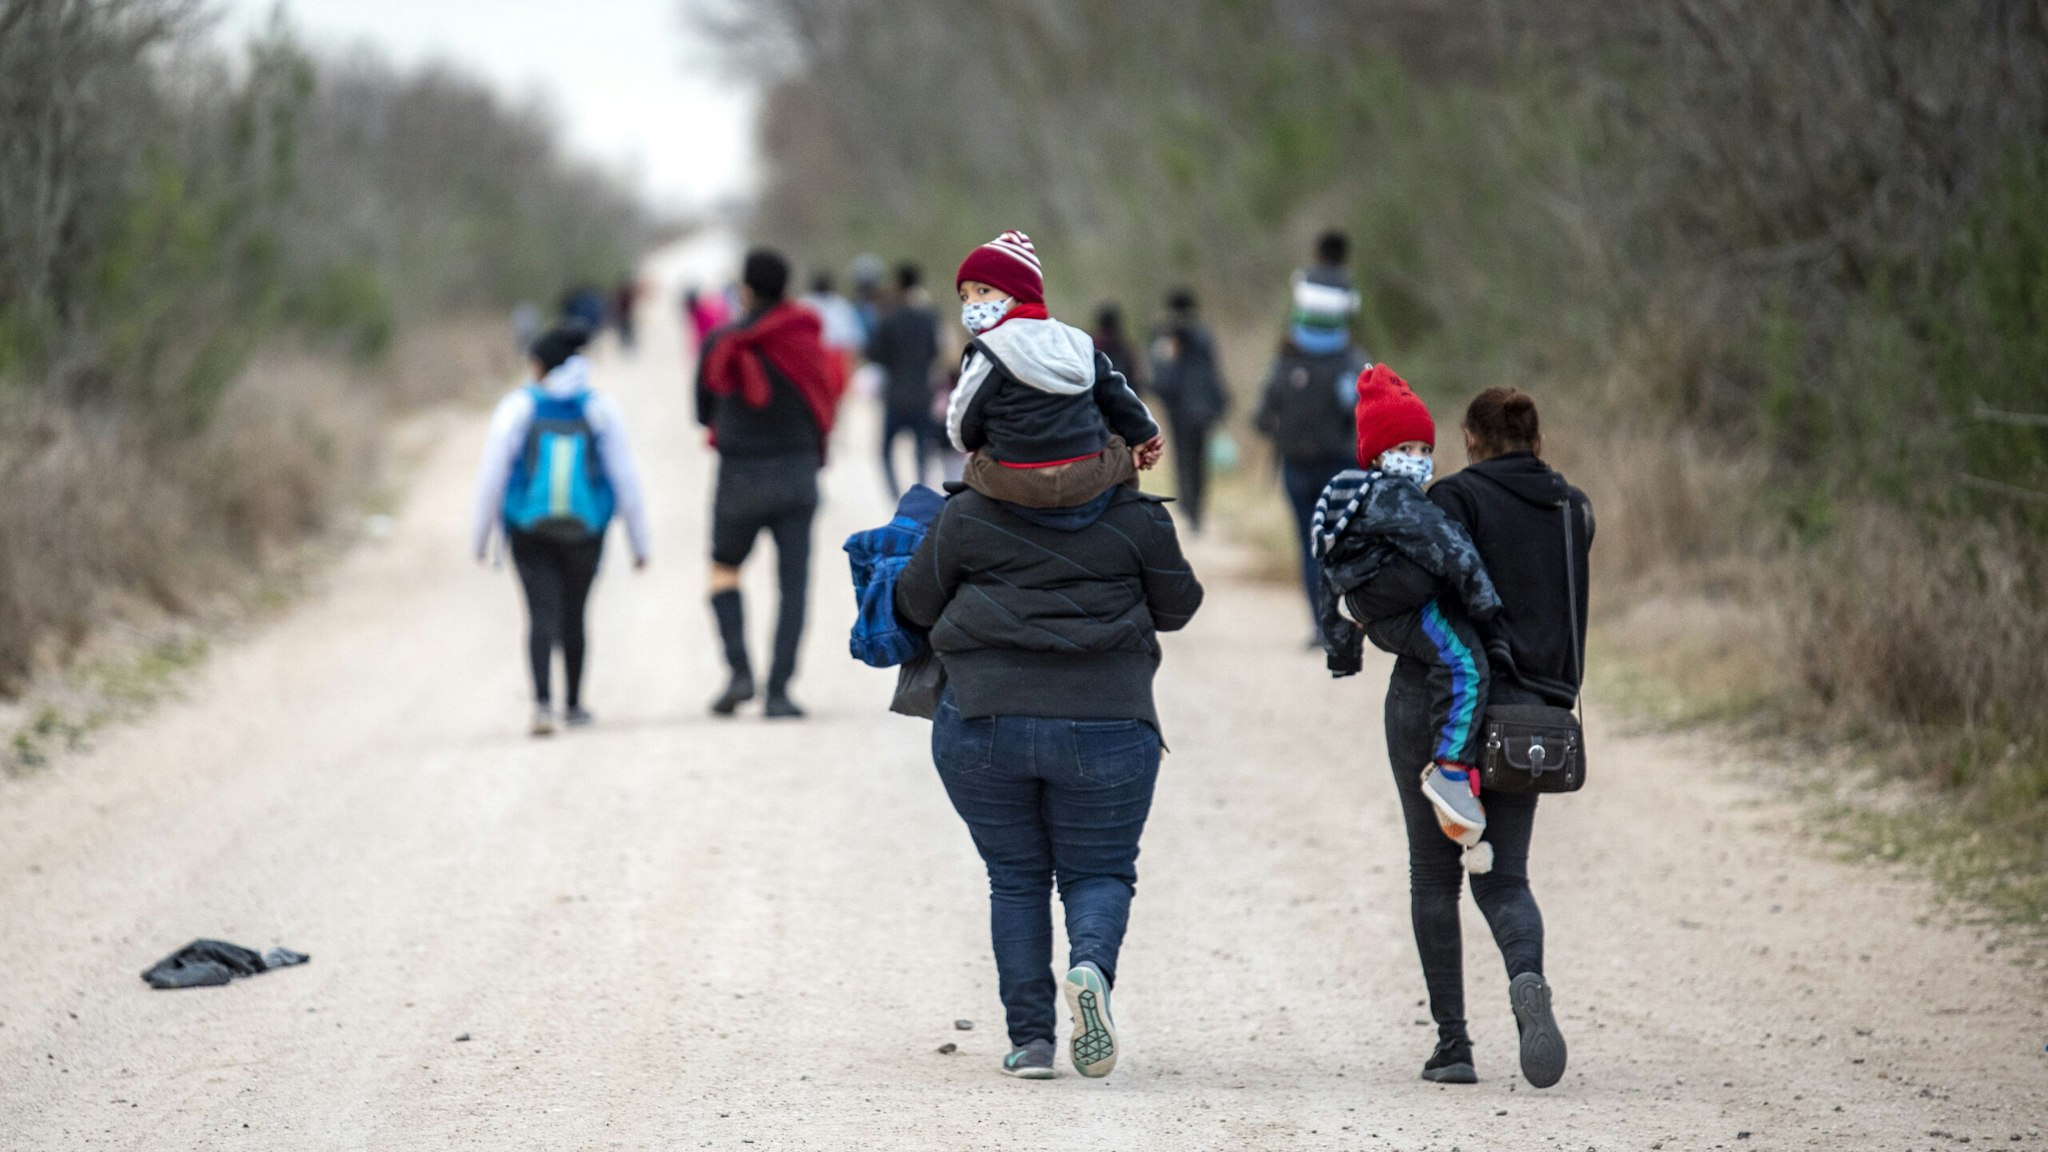 Migrant families walk toward a Customs and Border Patrol processing center near Mission, Texas, U.S., on Tuesday, March 2, 2021. President Biden told his Mexican counterpart, Andres Manuel Lopez Obrador, during their virtual meeting last week that he agreed on the need to increase legal paths to immigration, two Mexican officials said.